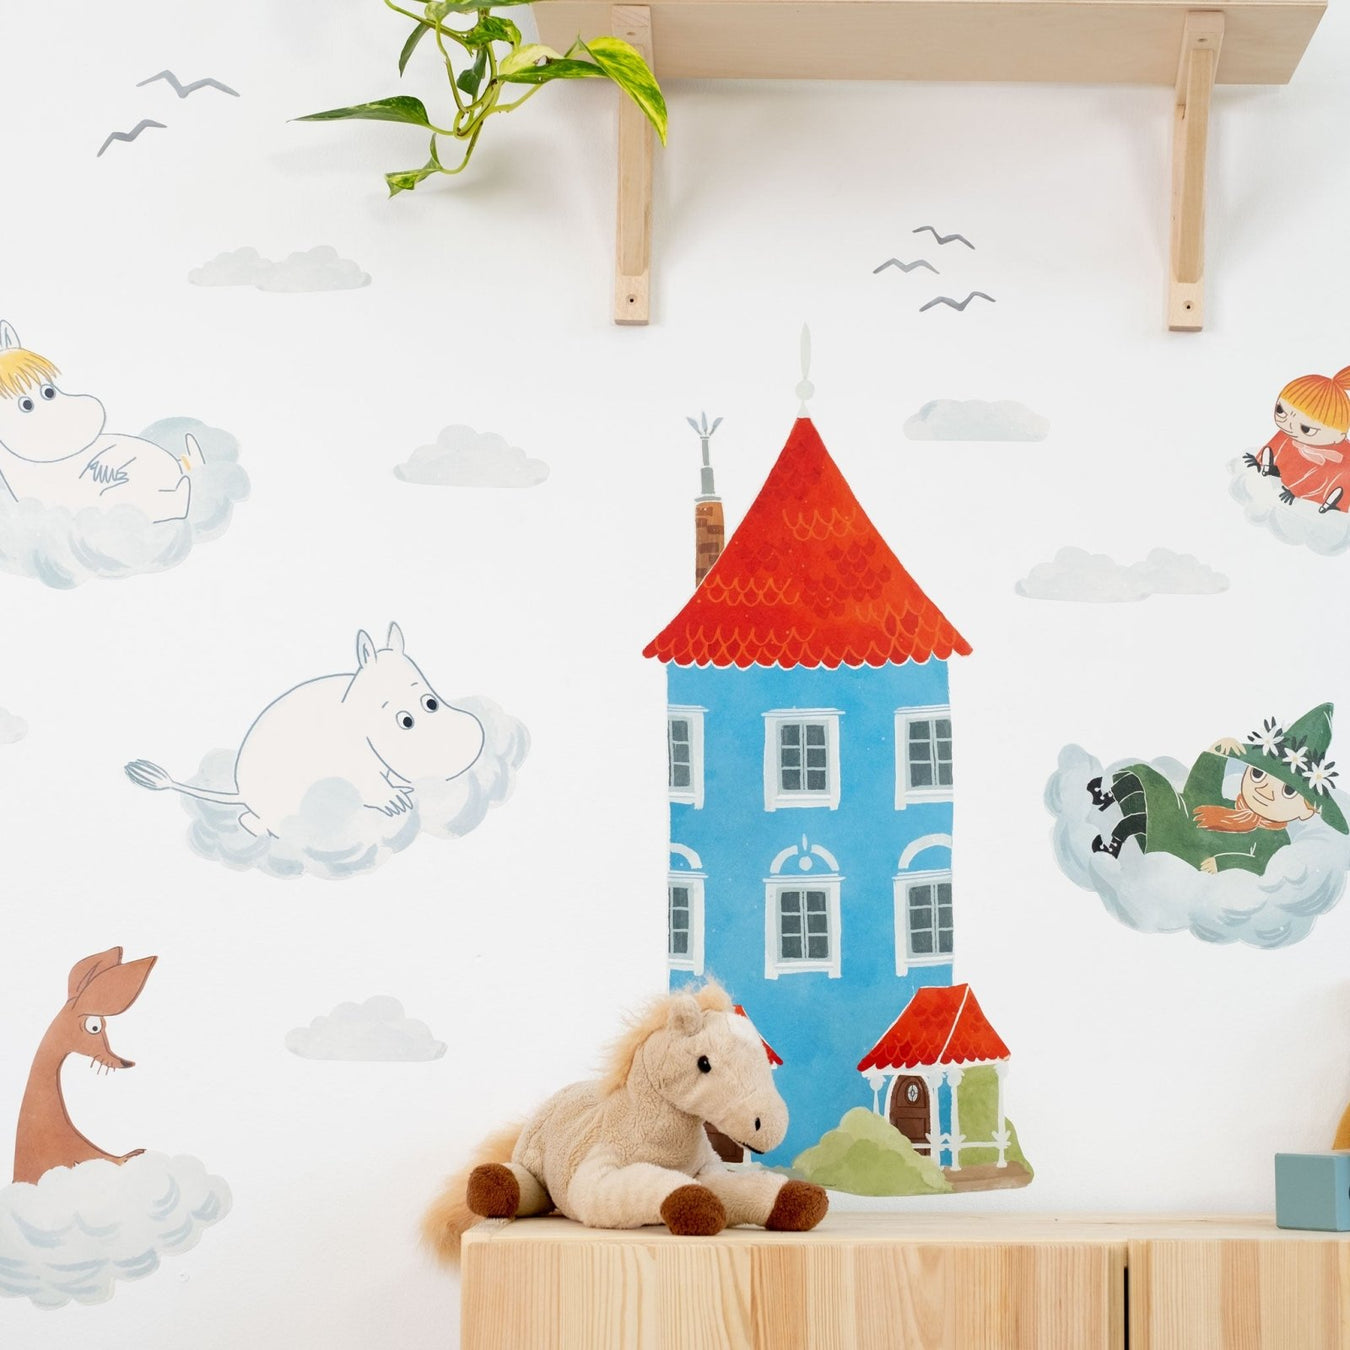 Moomin x Sundays - Moomin Wall Stickers and Posters - Made of Sundays